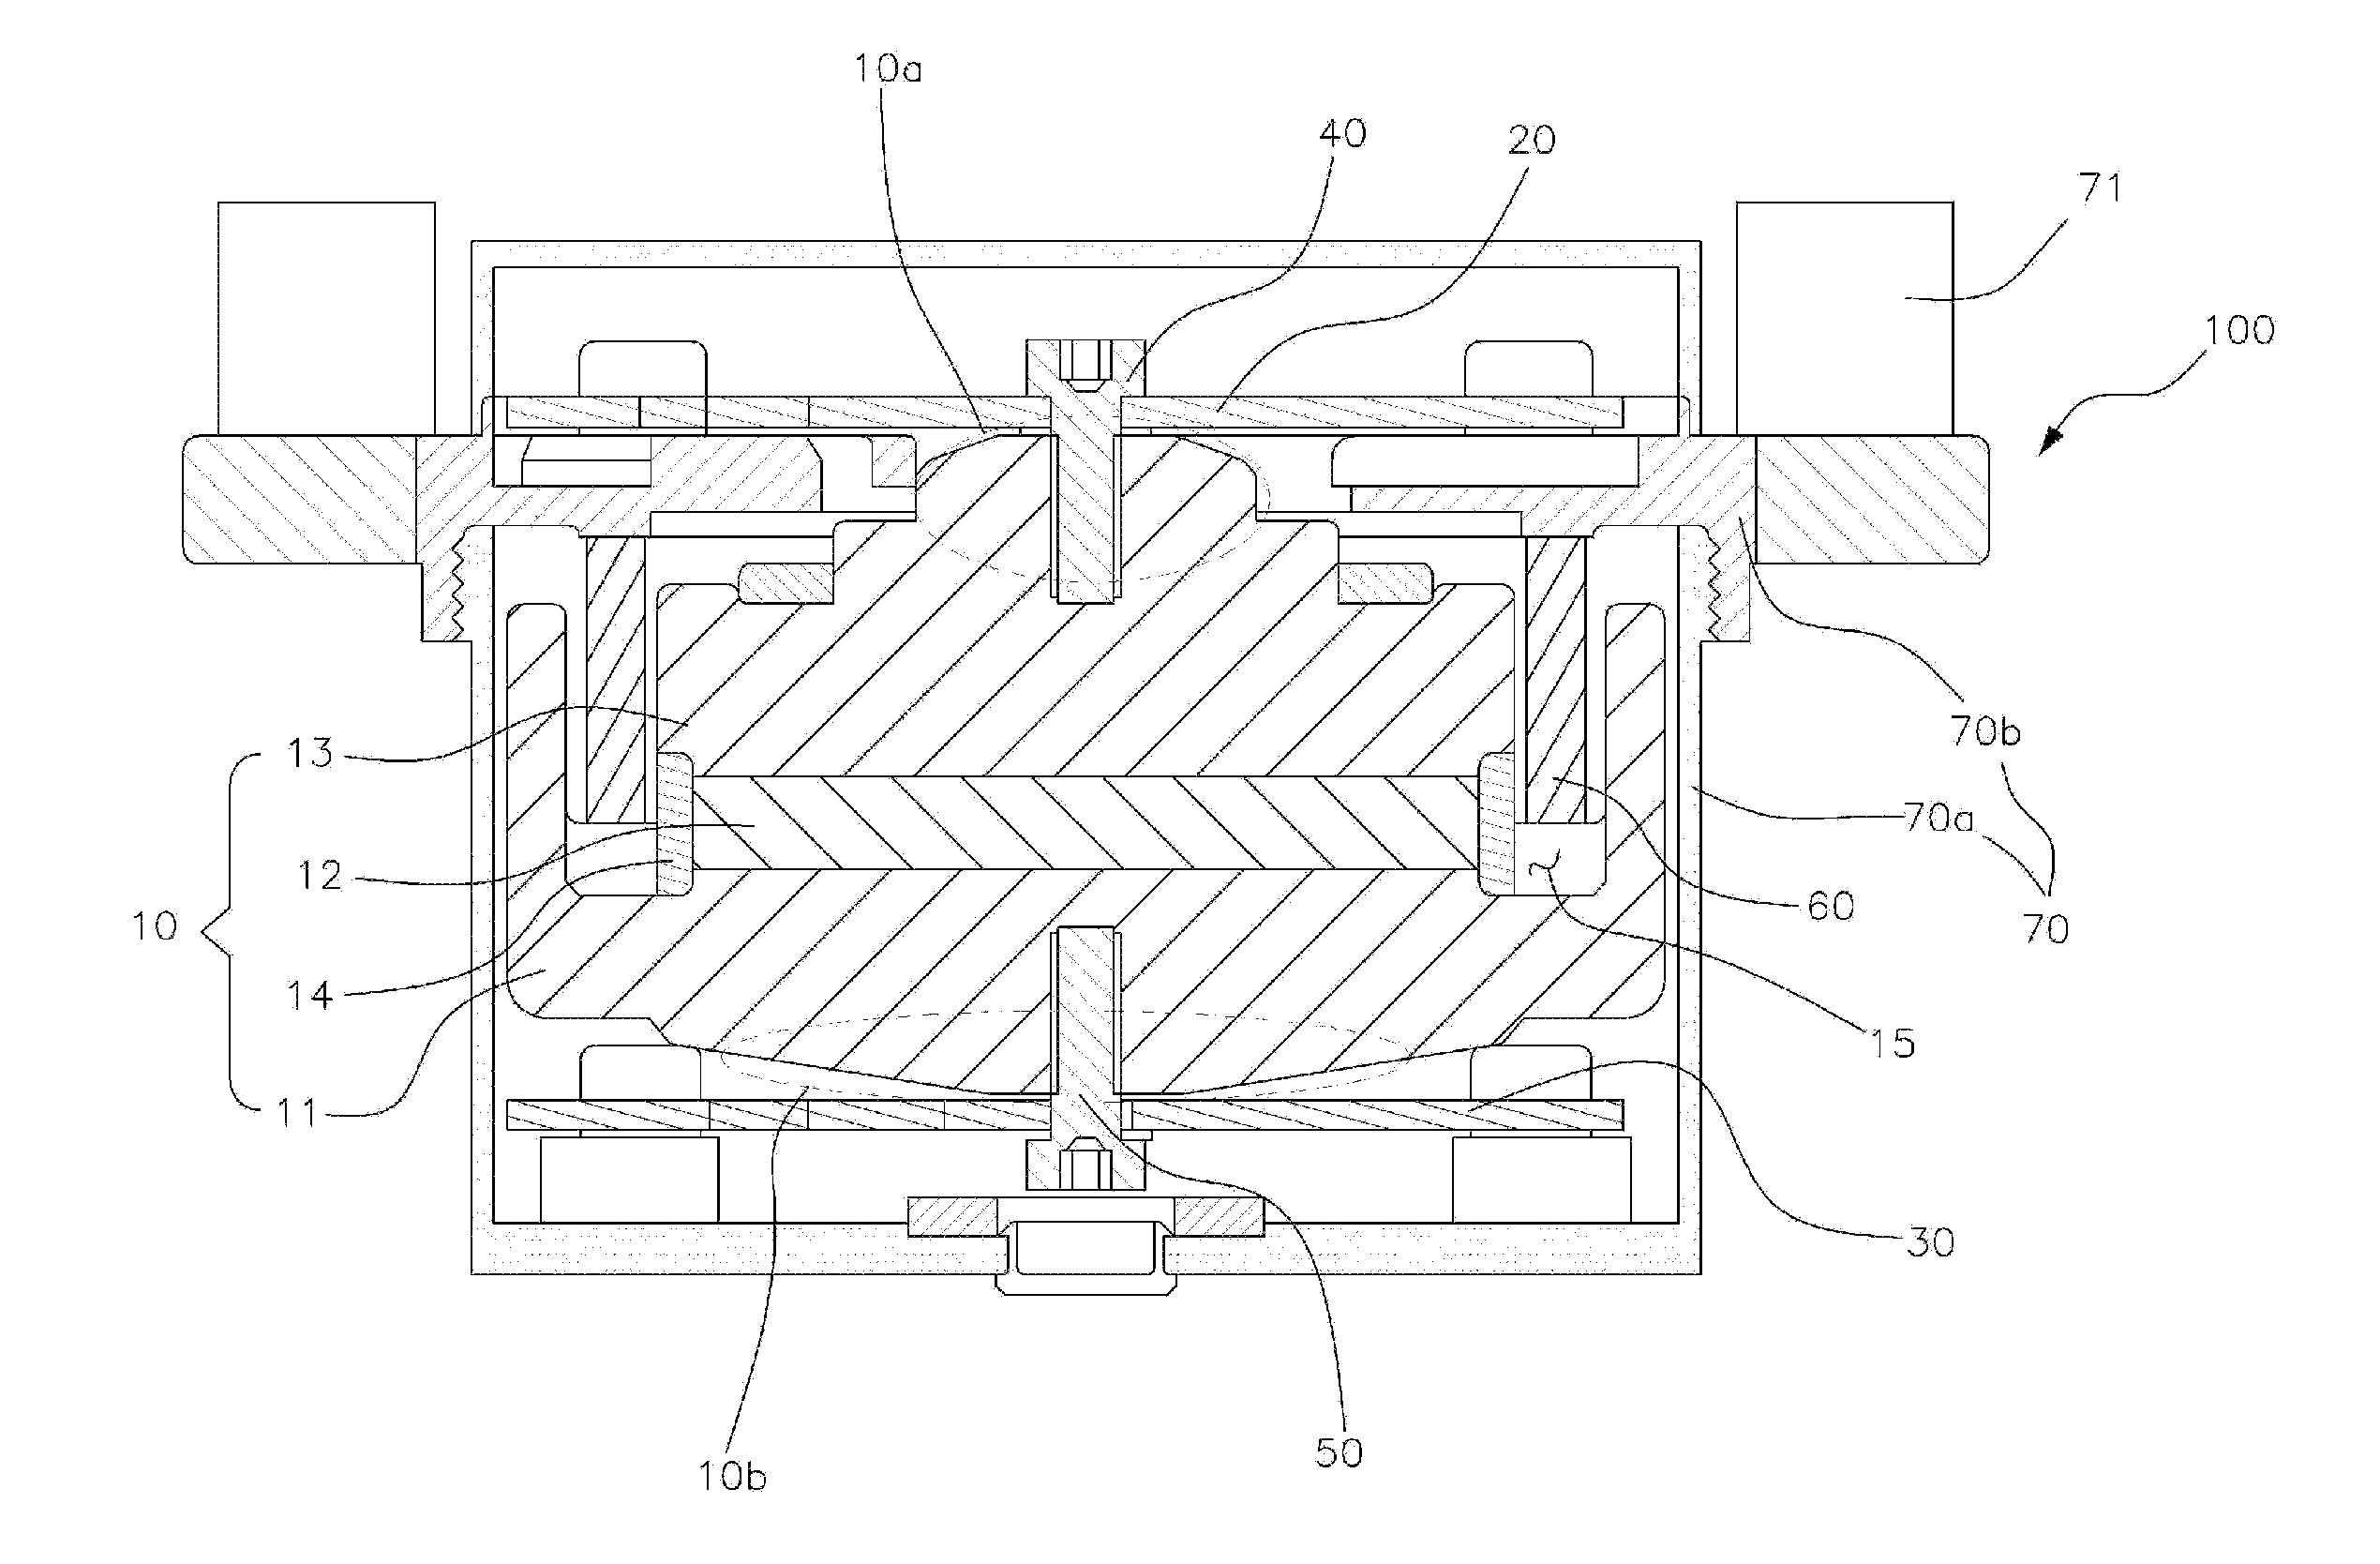 Active dynamic vibration absorber apparatus for vehicle